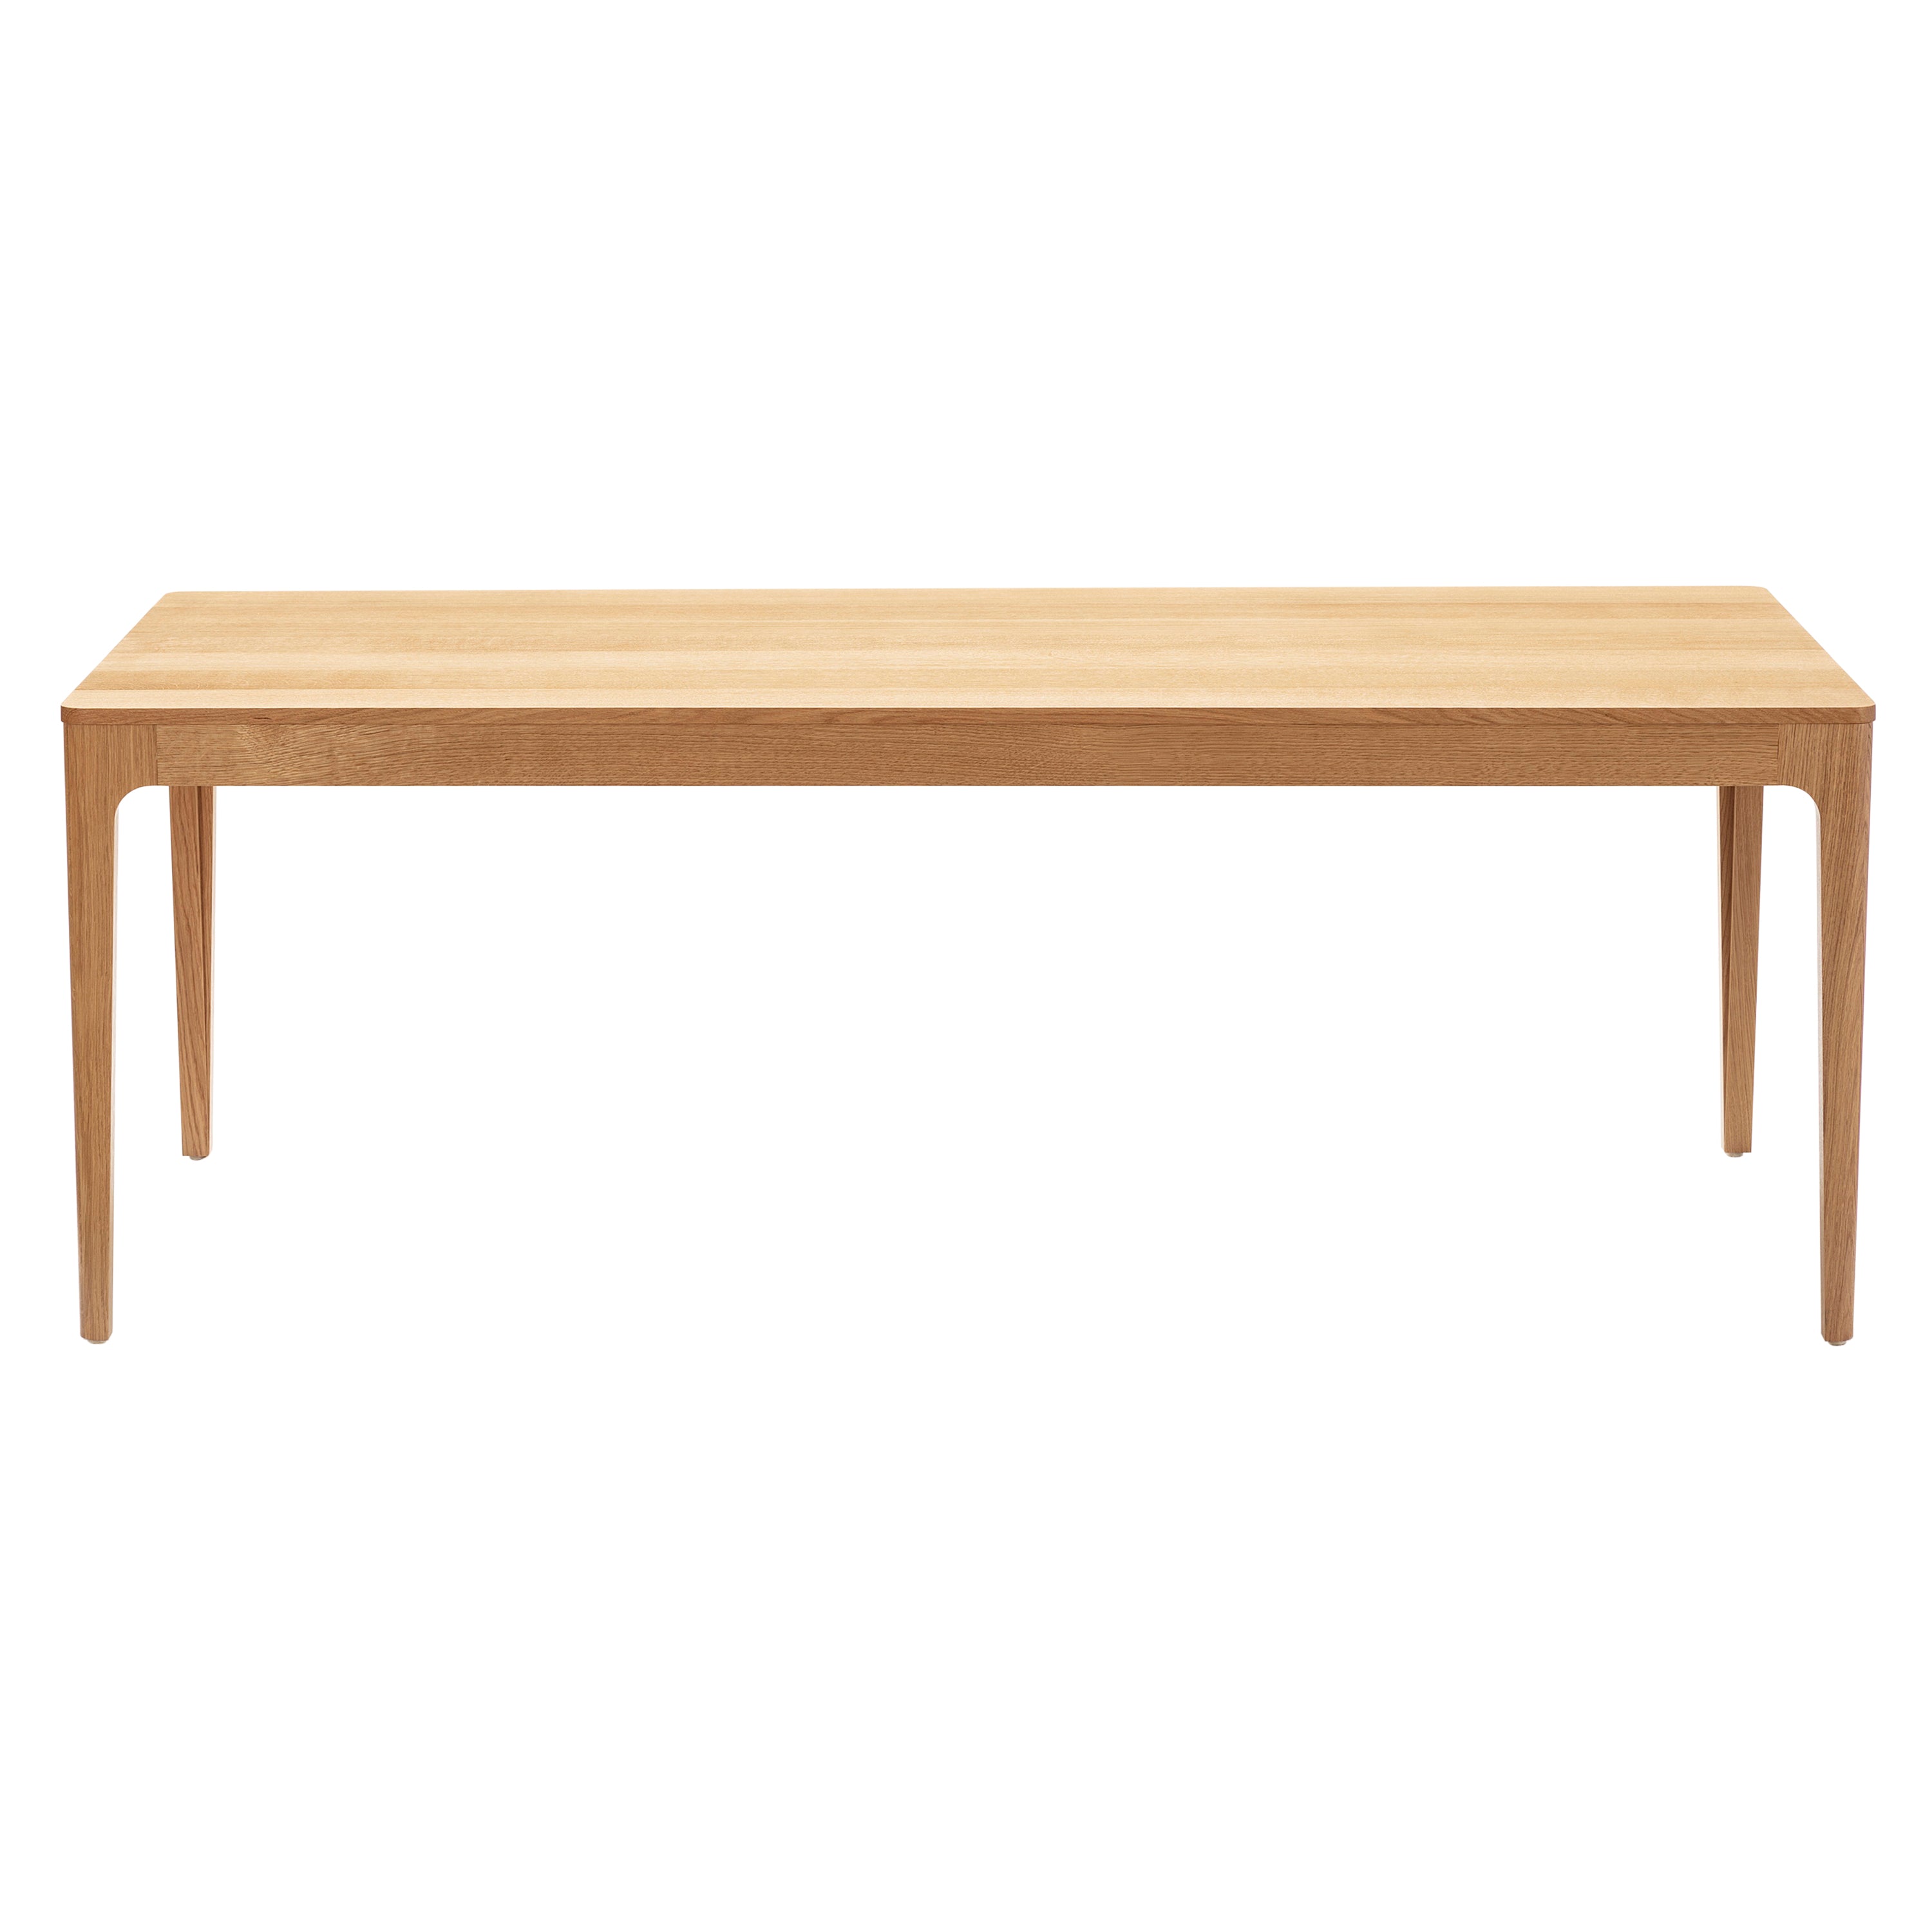 Home Dining Table: Large - 118.1